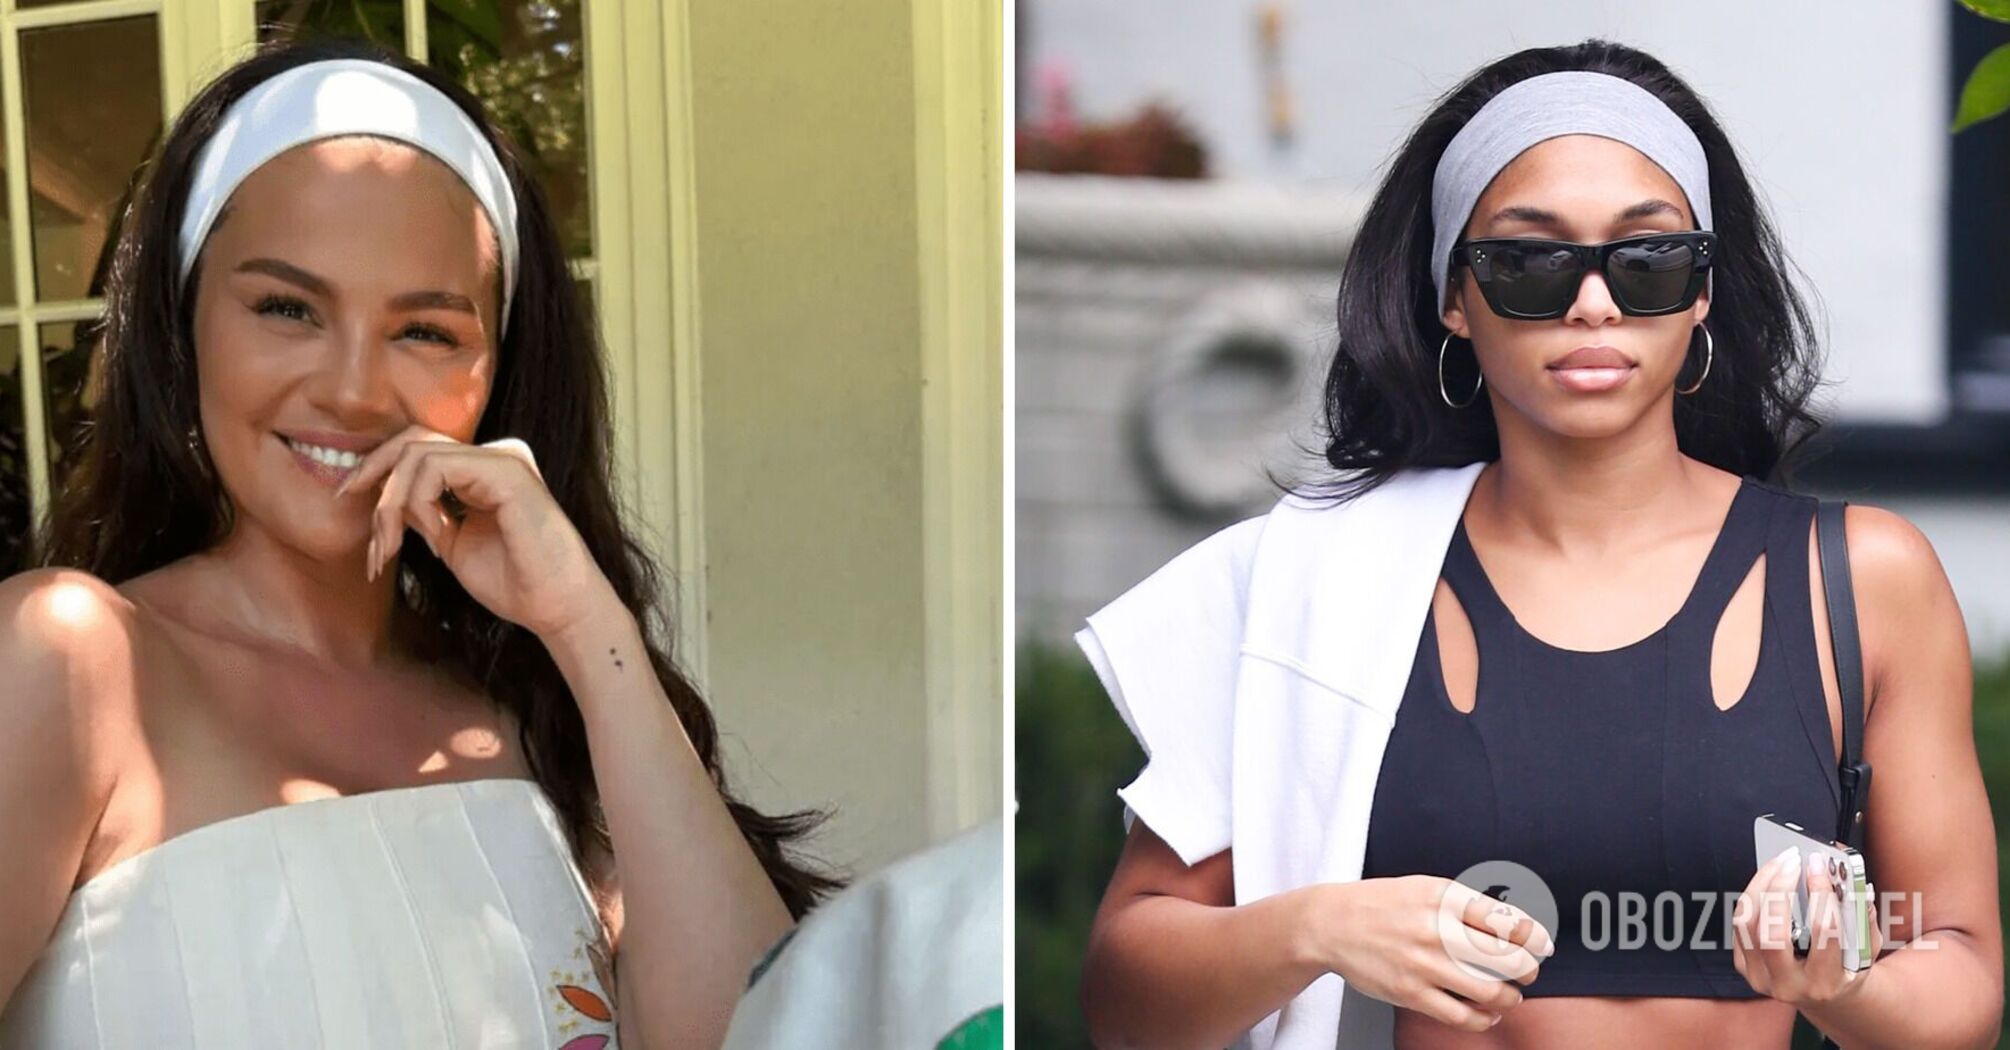 Celebrities are bringing back hair accessory popular in the 90s. Photo